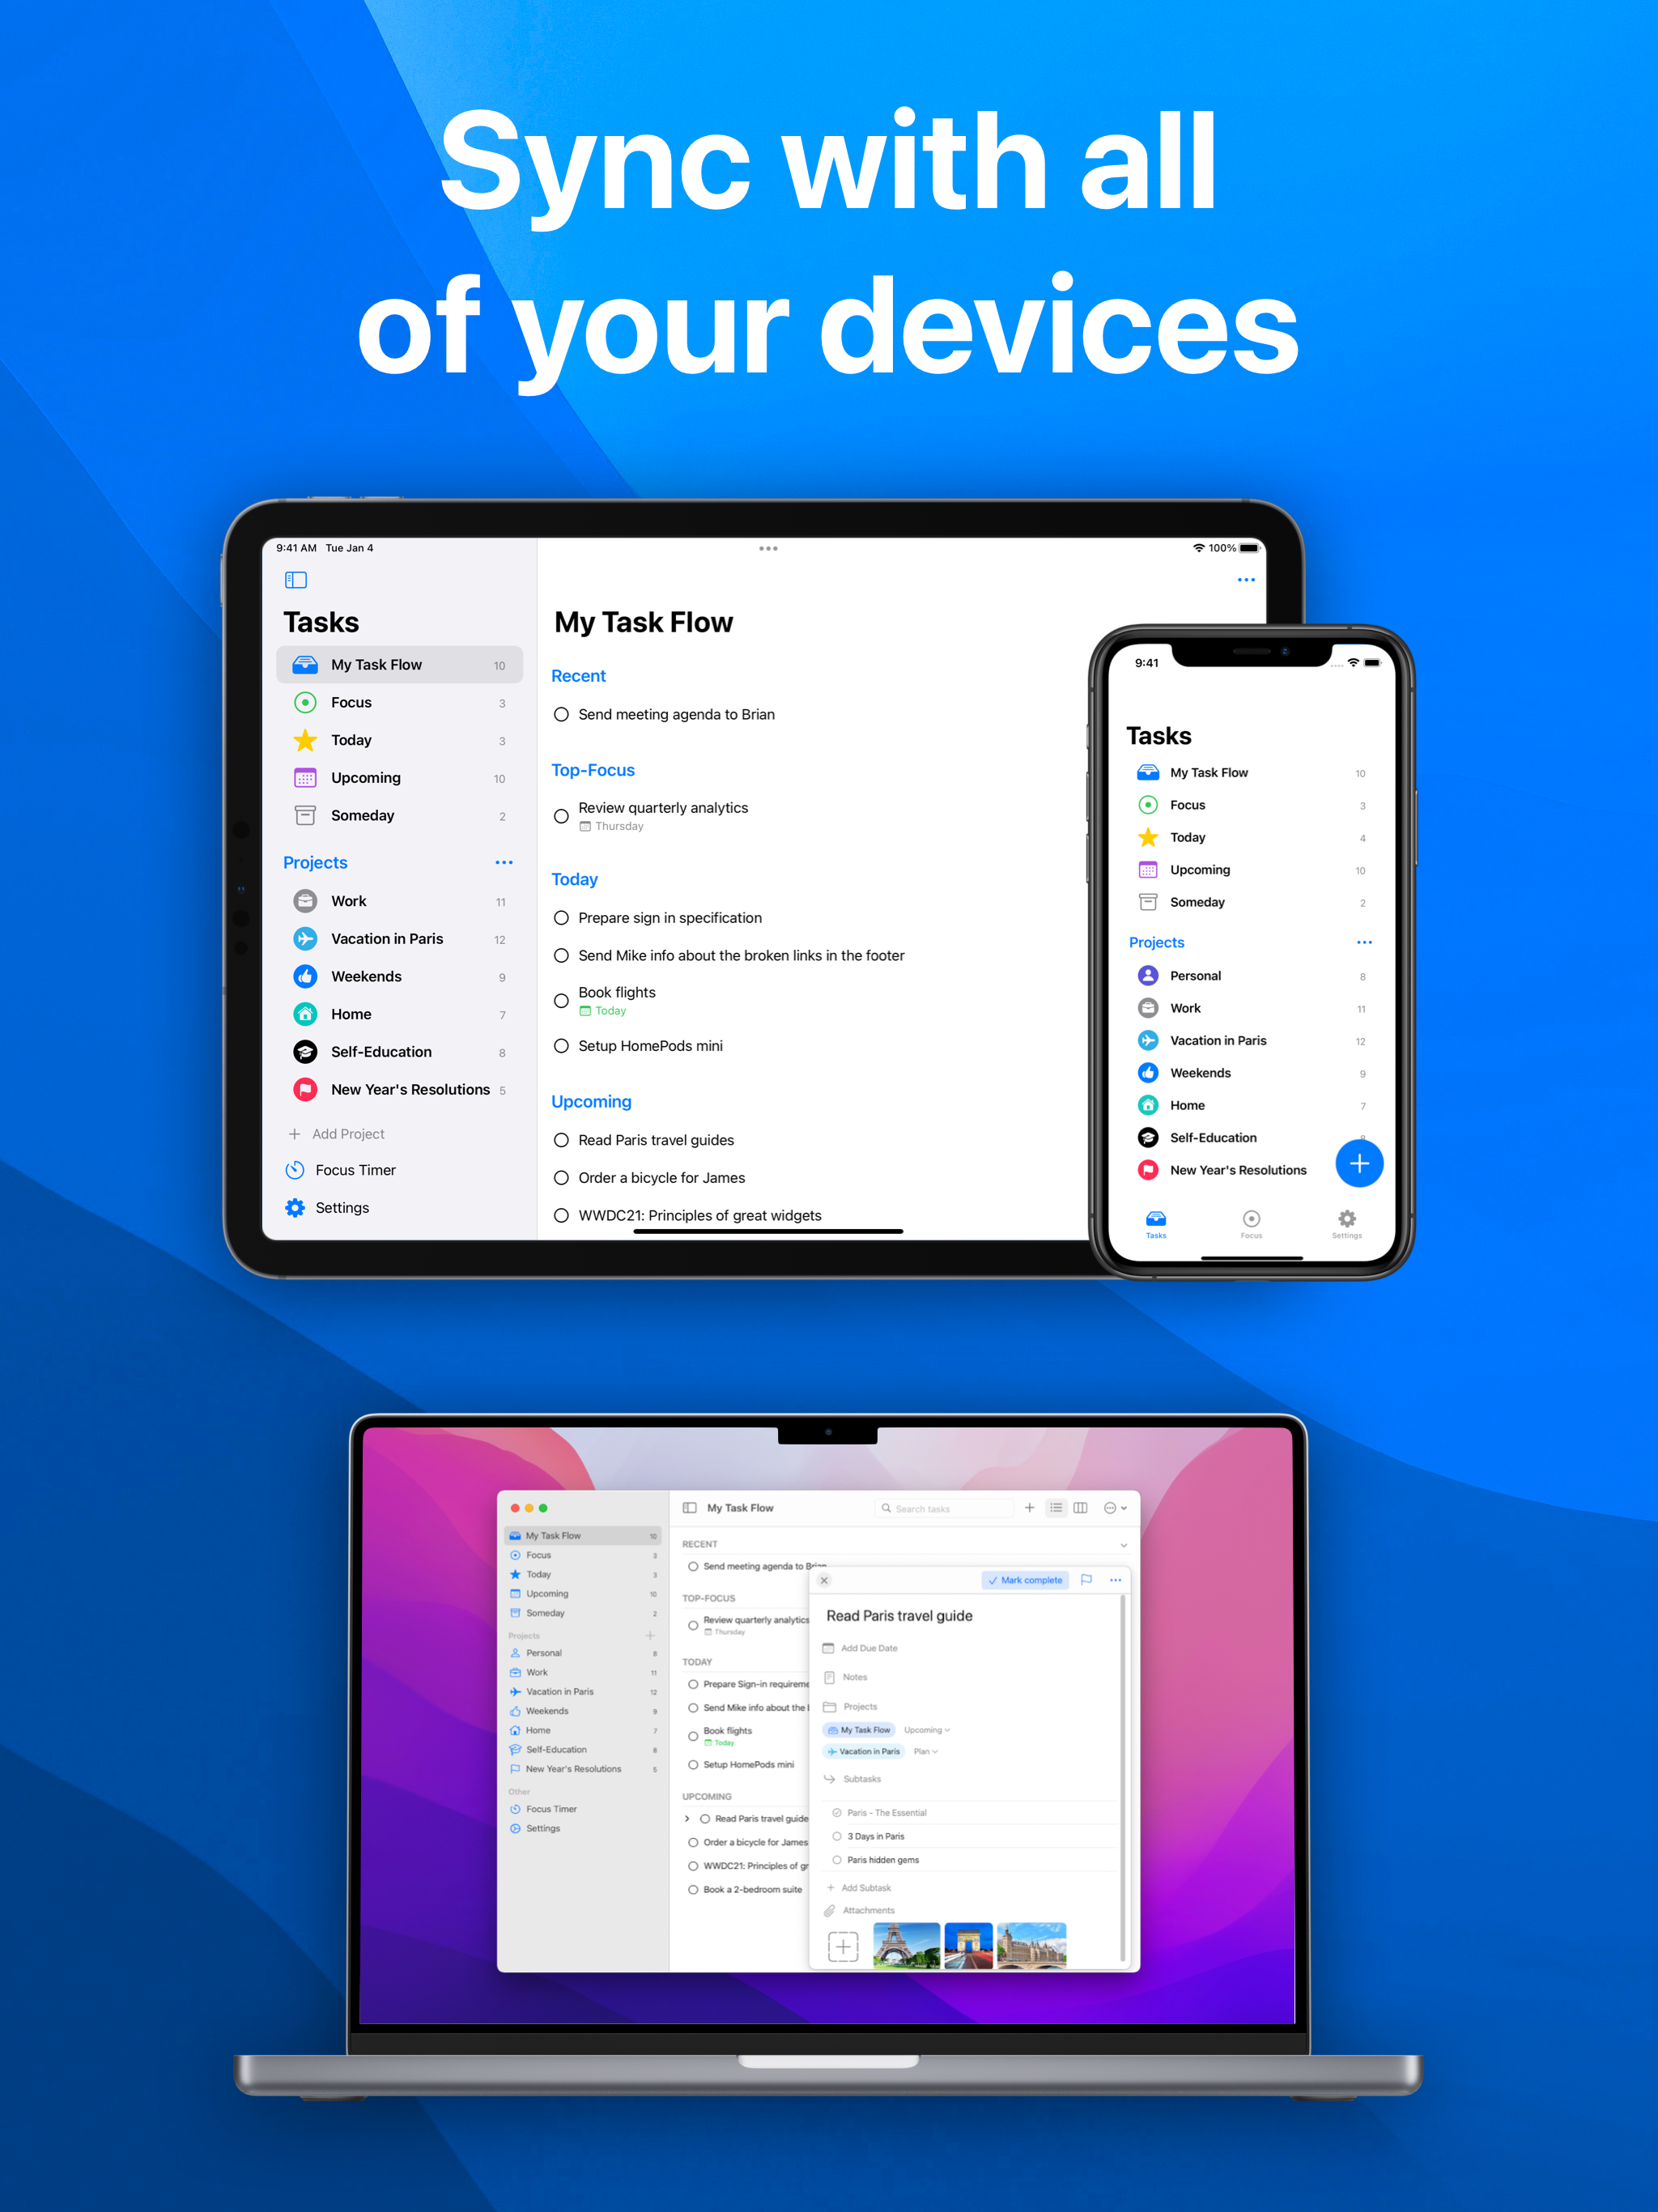 Sync with all your devices